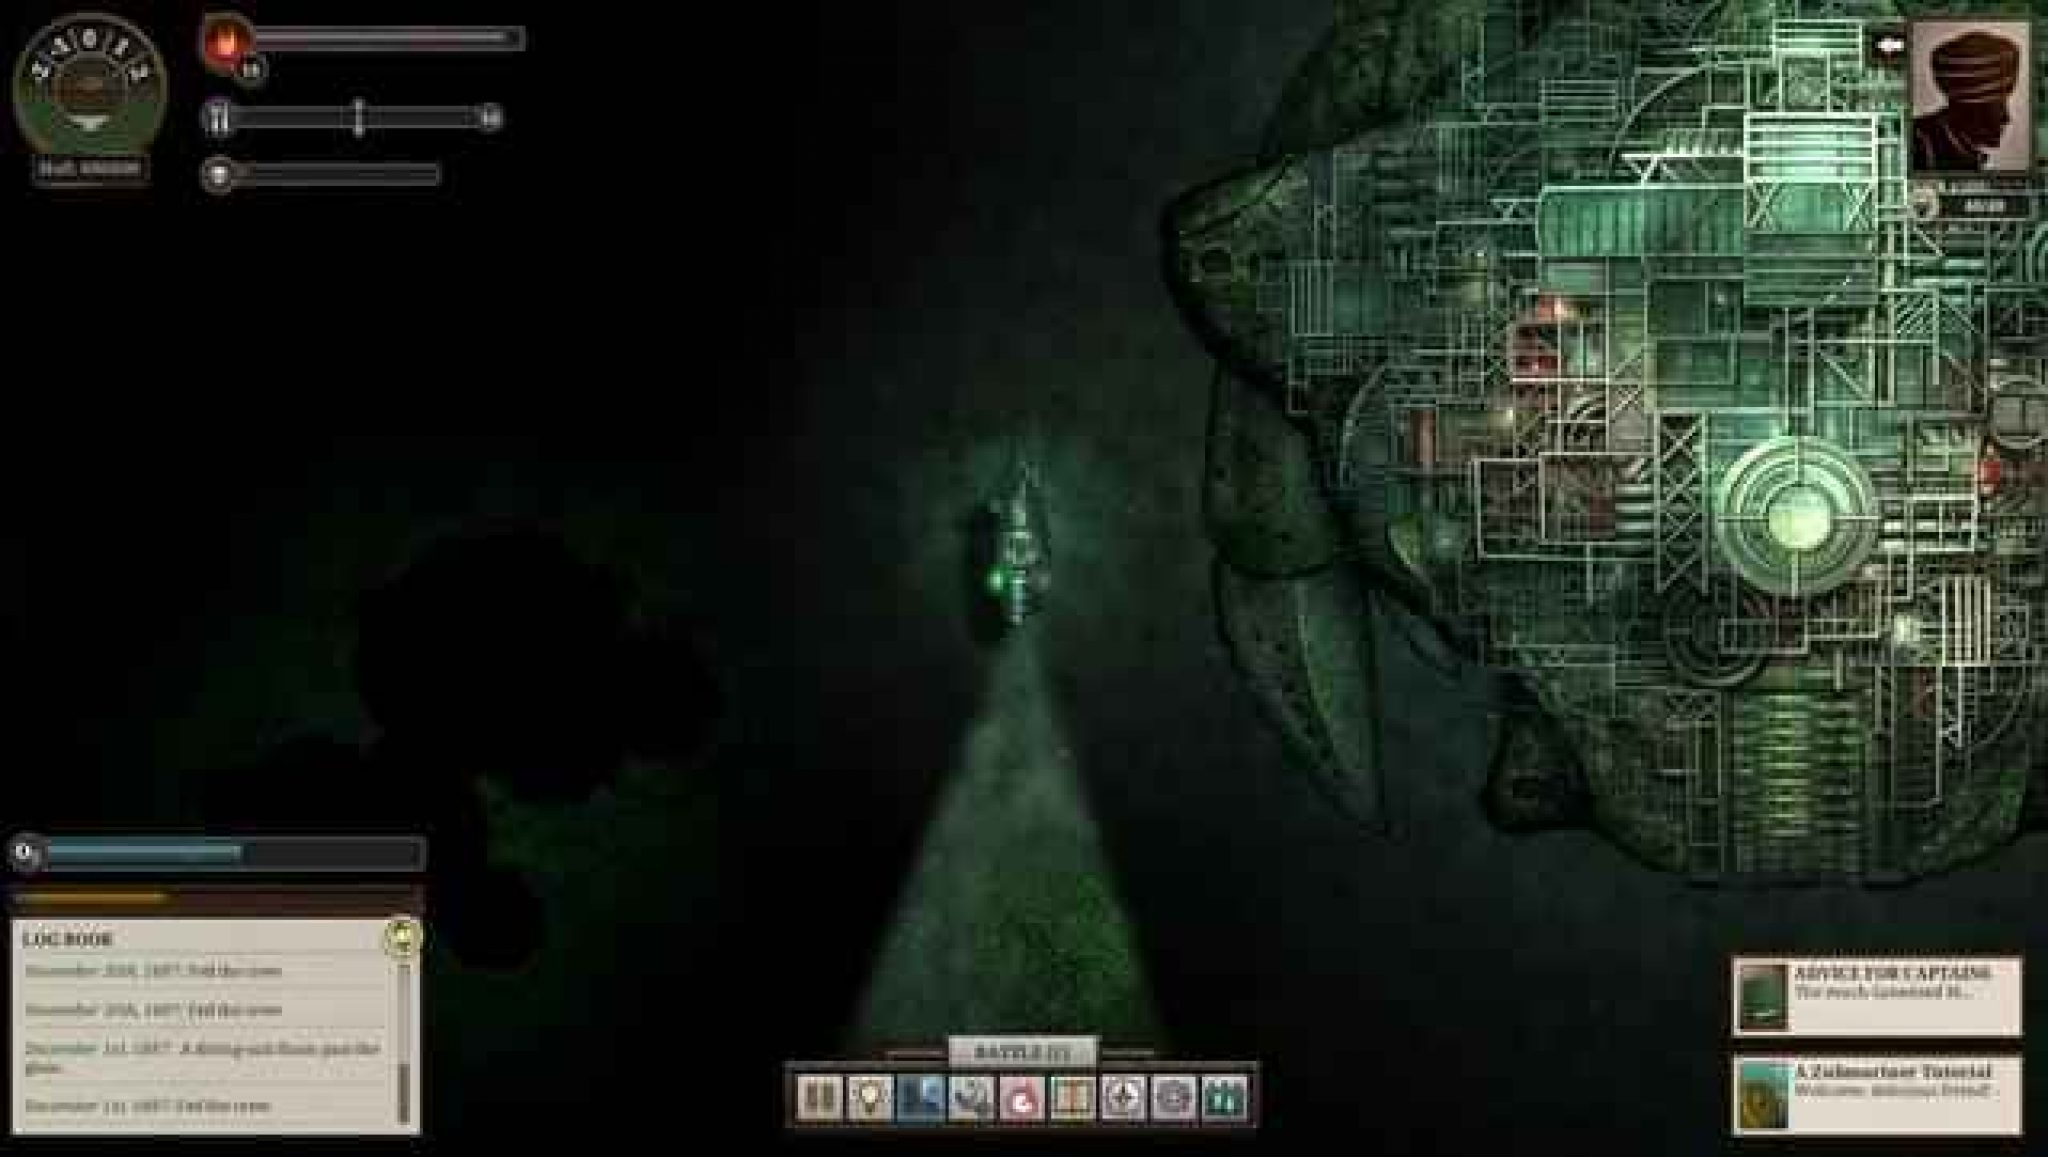 for mac instal Sunless Sea